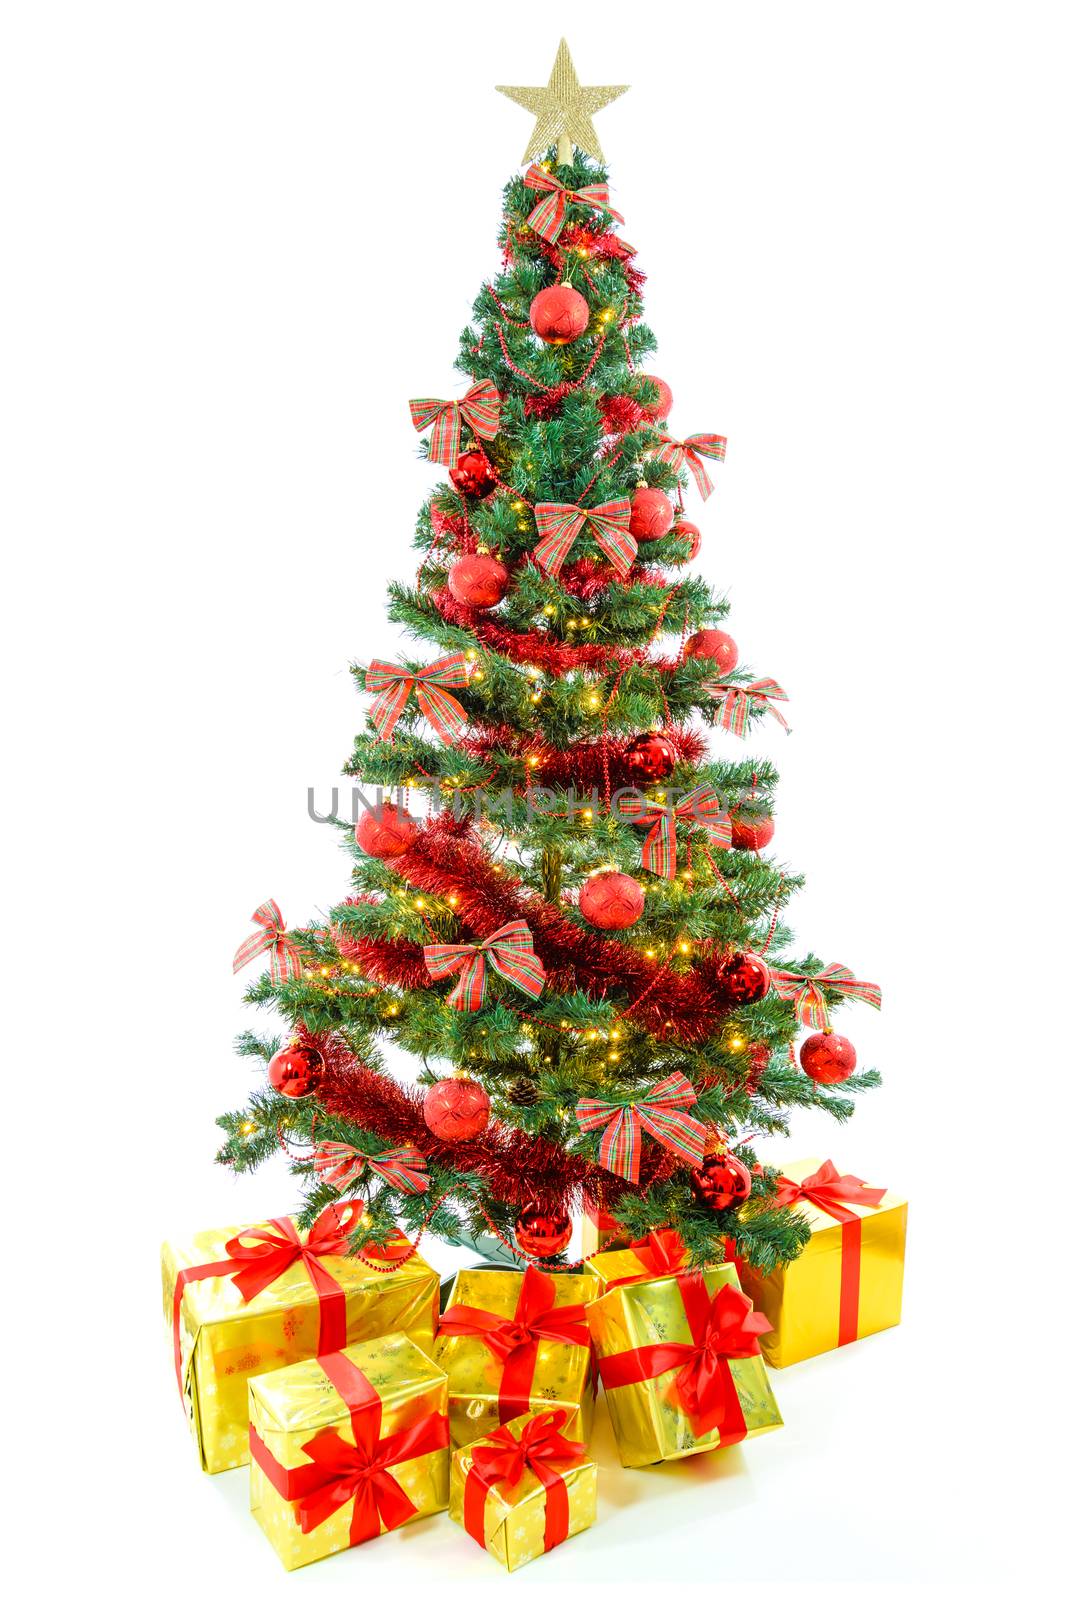 Luxury golden colored gifts with red ribbon under a beautiful, large christmas tree with red balls, bows and lights isolated on white background.